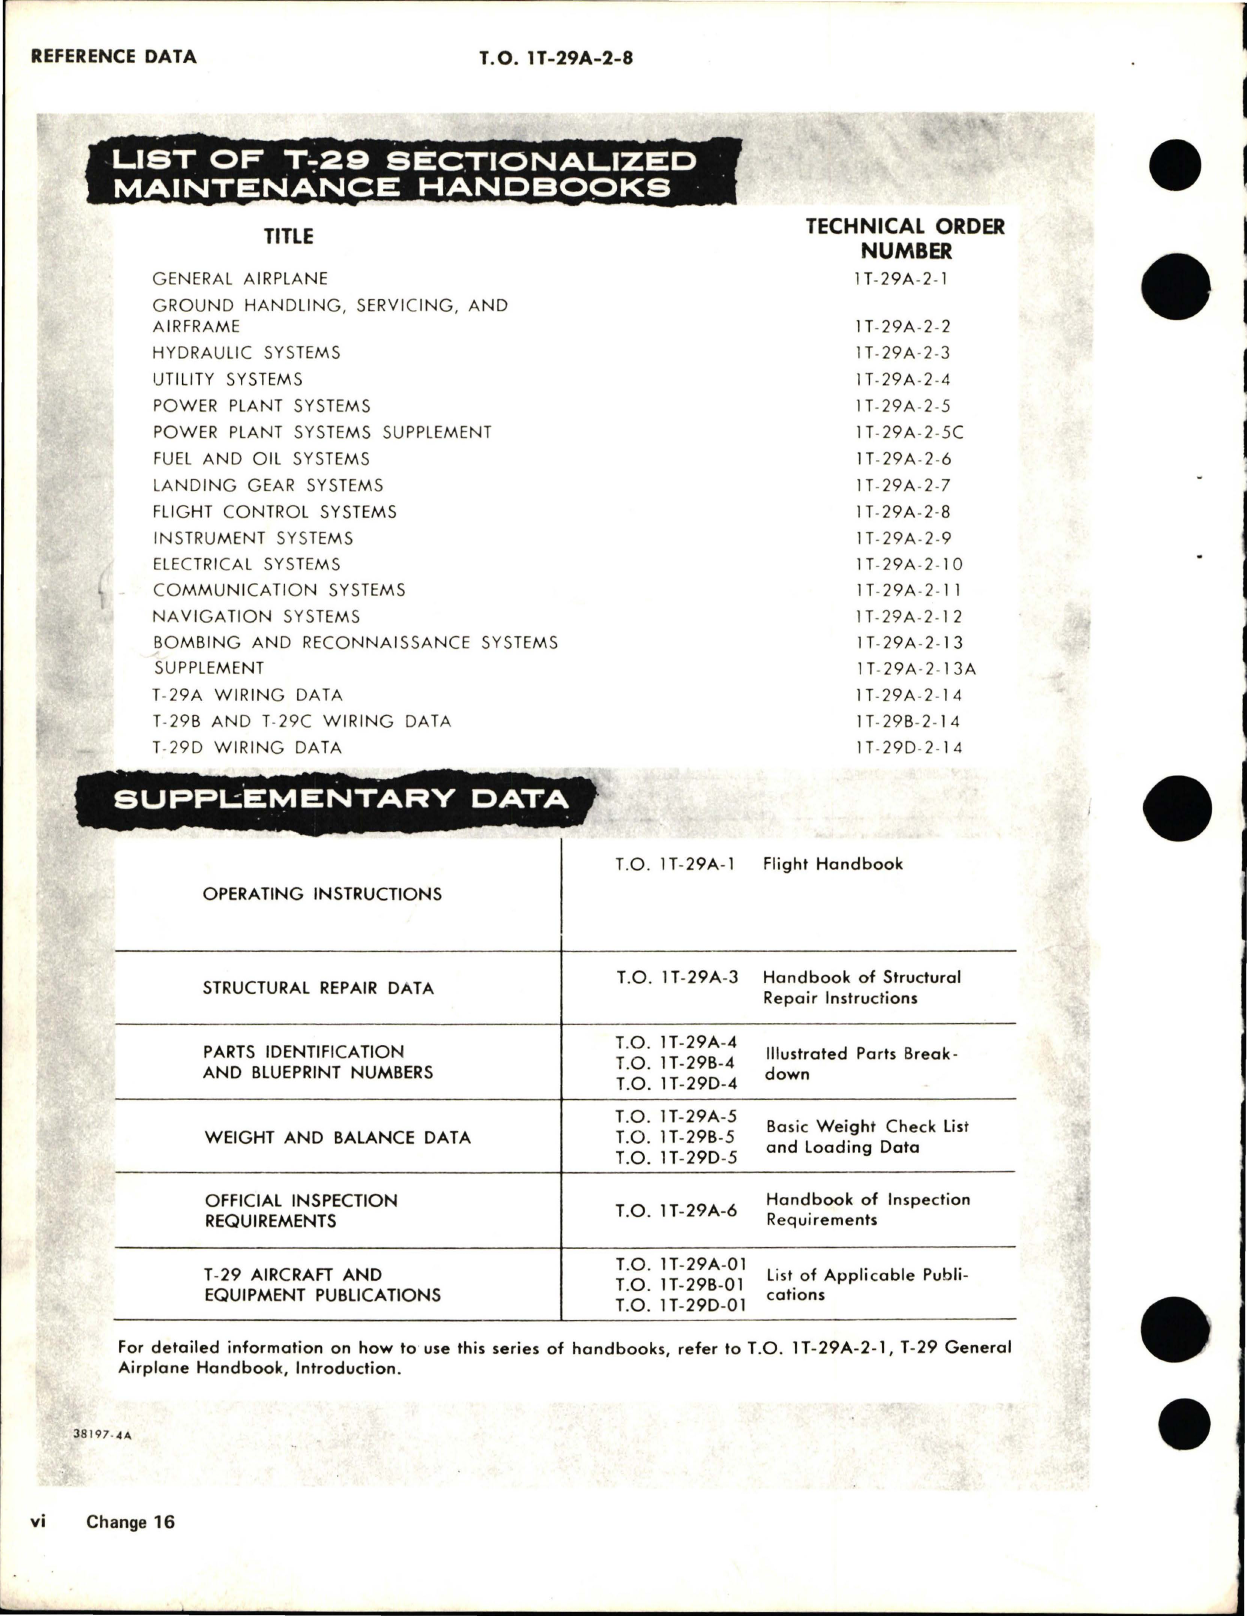 Sample page 8 from AirCorps Library document: Maintenance for Flight Control Systems, T-29A, T-29B, T-29C and T-29D